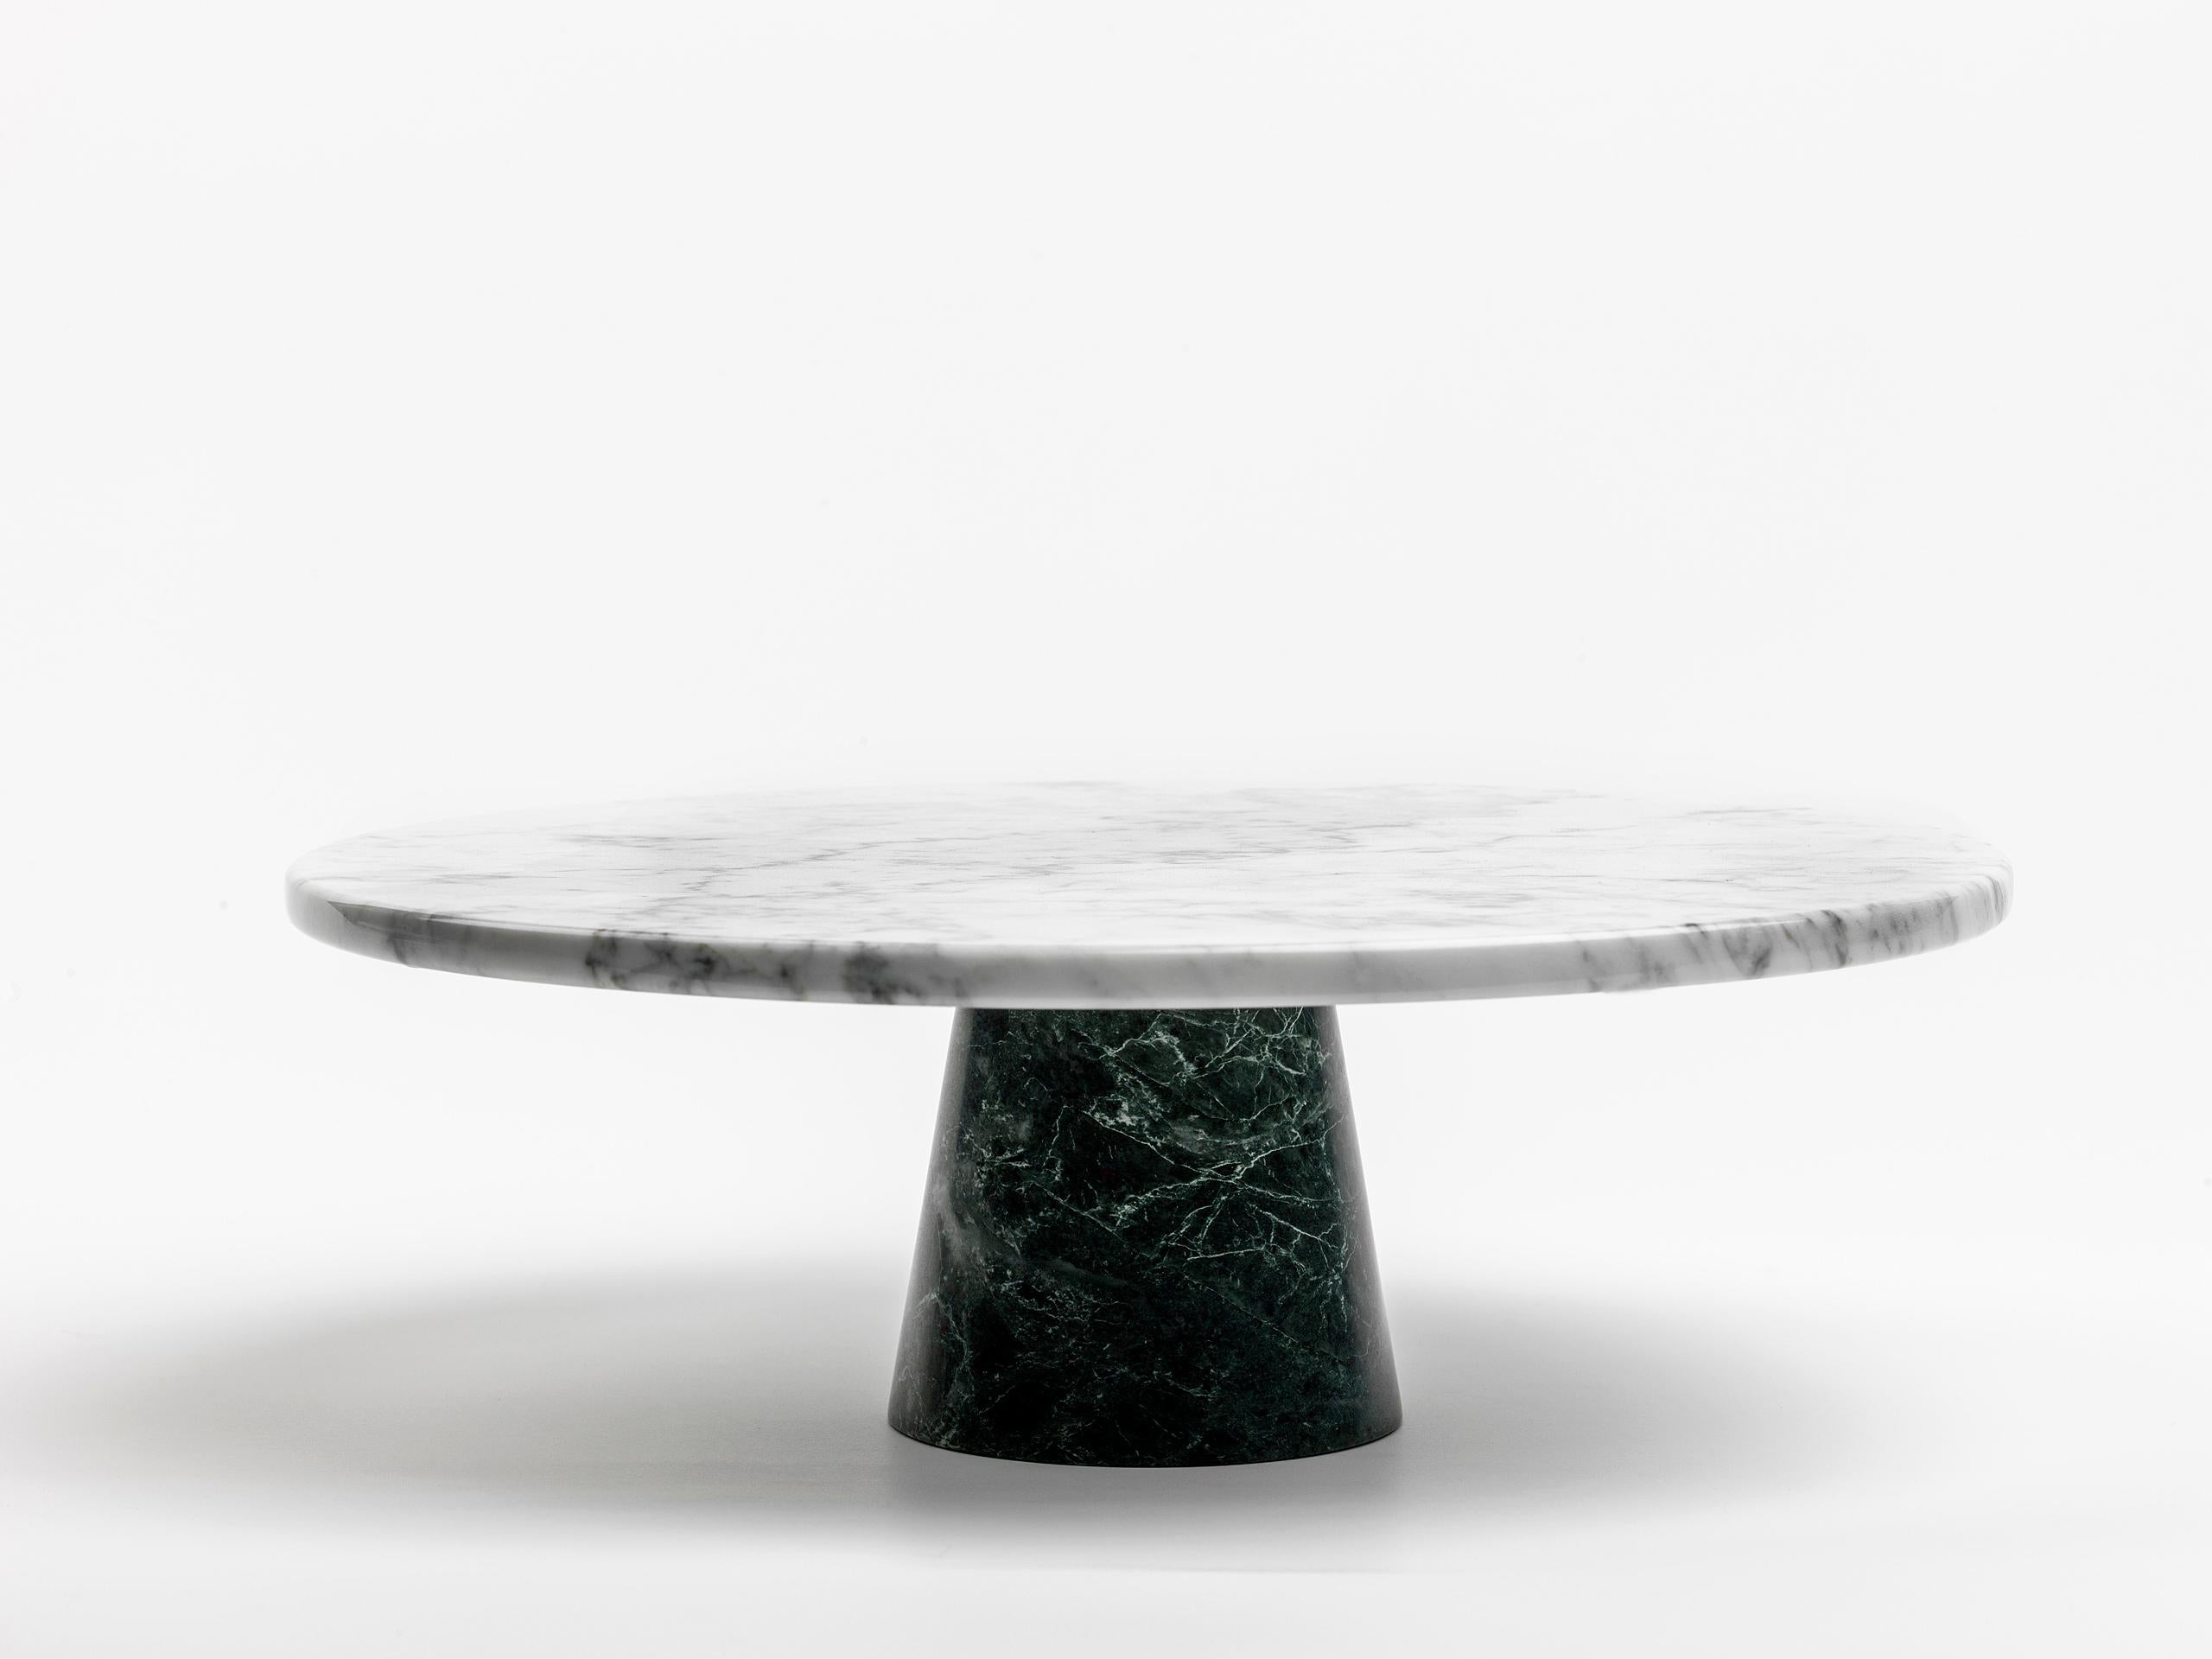 Marble stand cake with top dish in white Carrara marble and black marble base. Each piece is in a way unique (every marble block is different in veins and shades) and handmade by Italian artisans specialized over generations in processing marble.